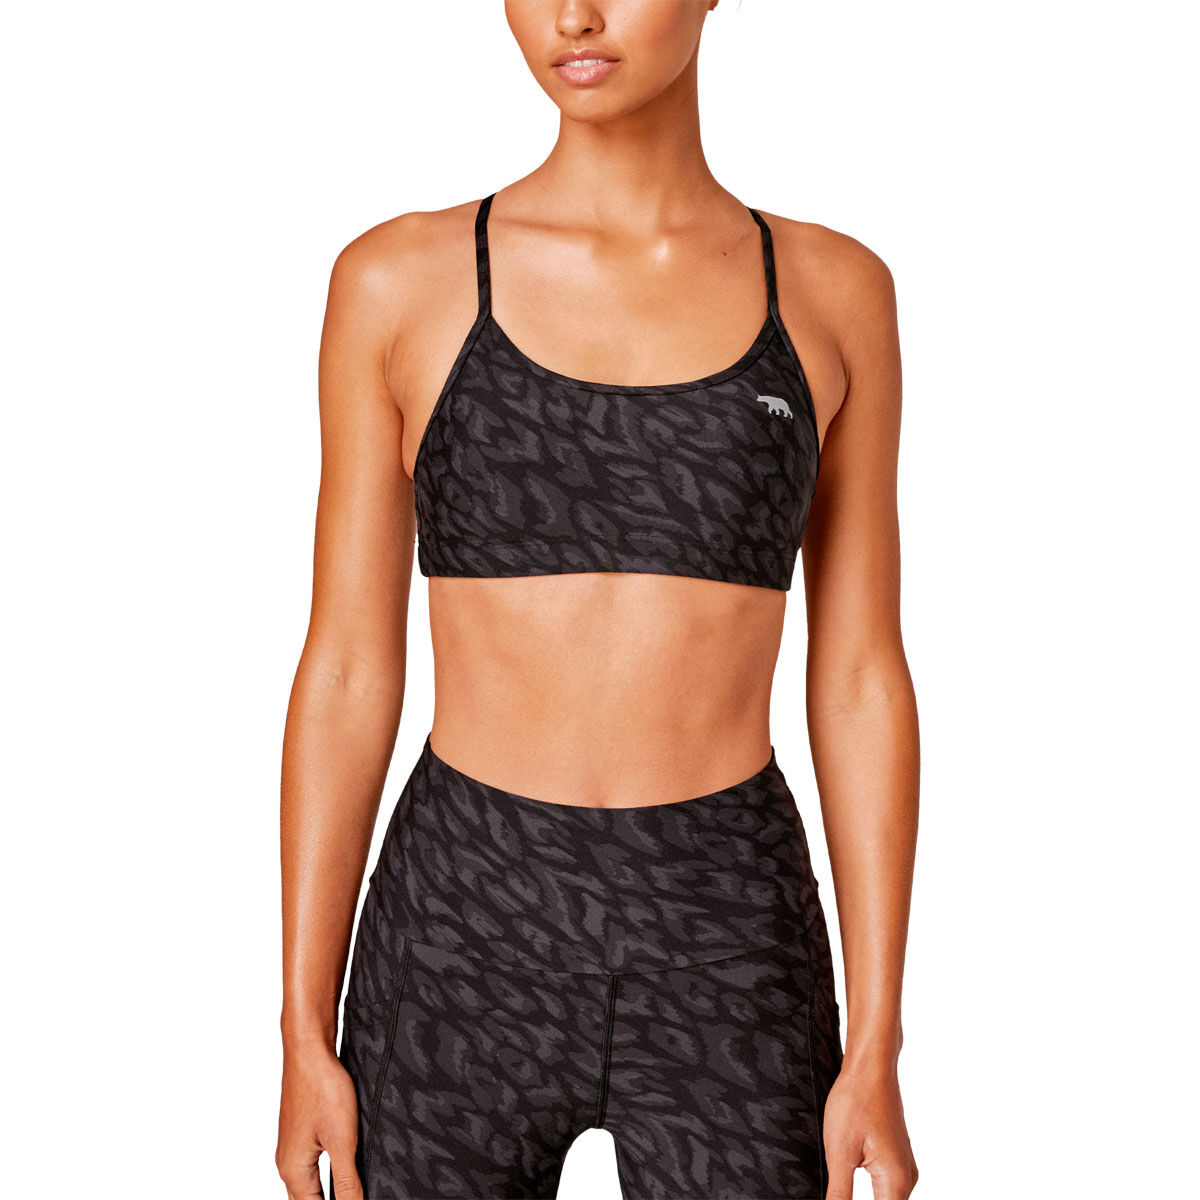 RUNNING BARE WMNS MOVE SPORTS BRA - Totally Sports & Surf